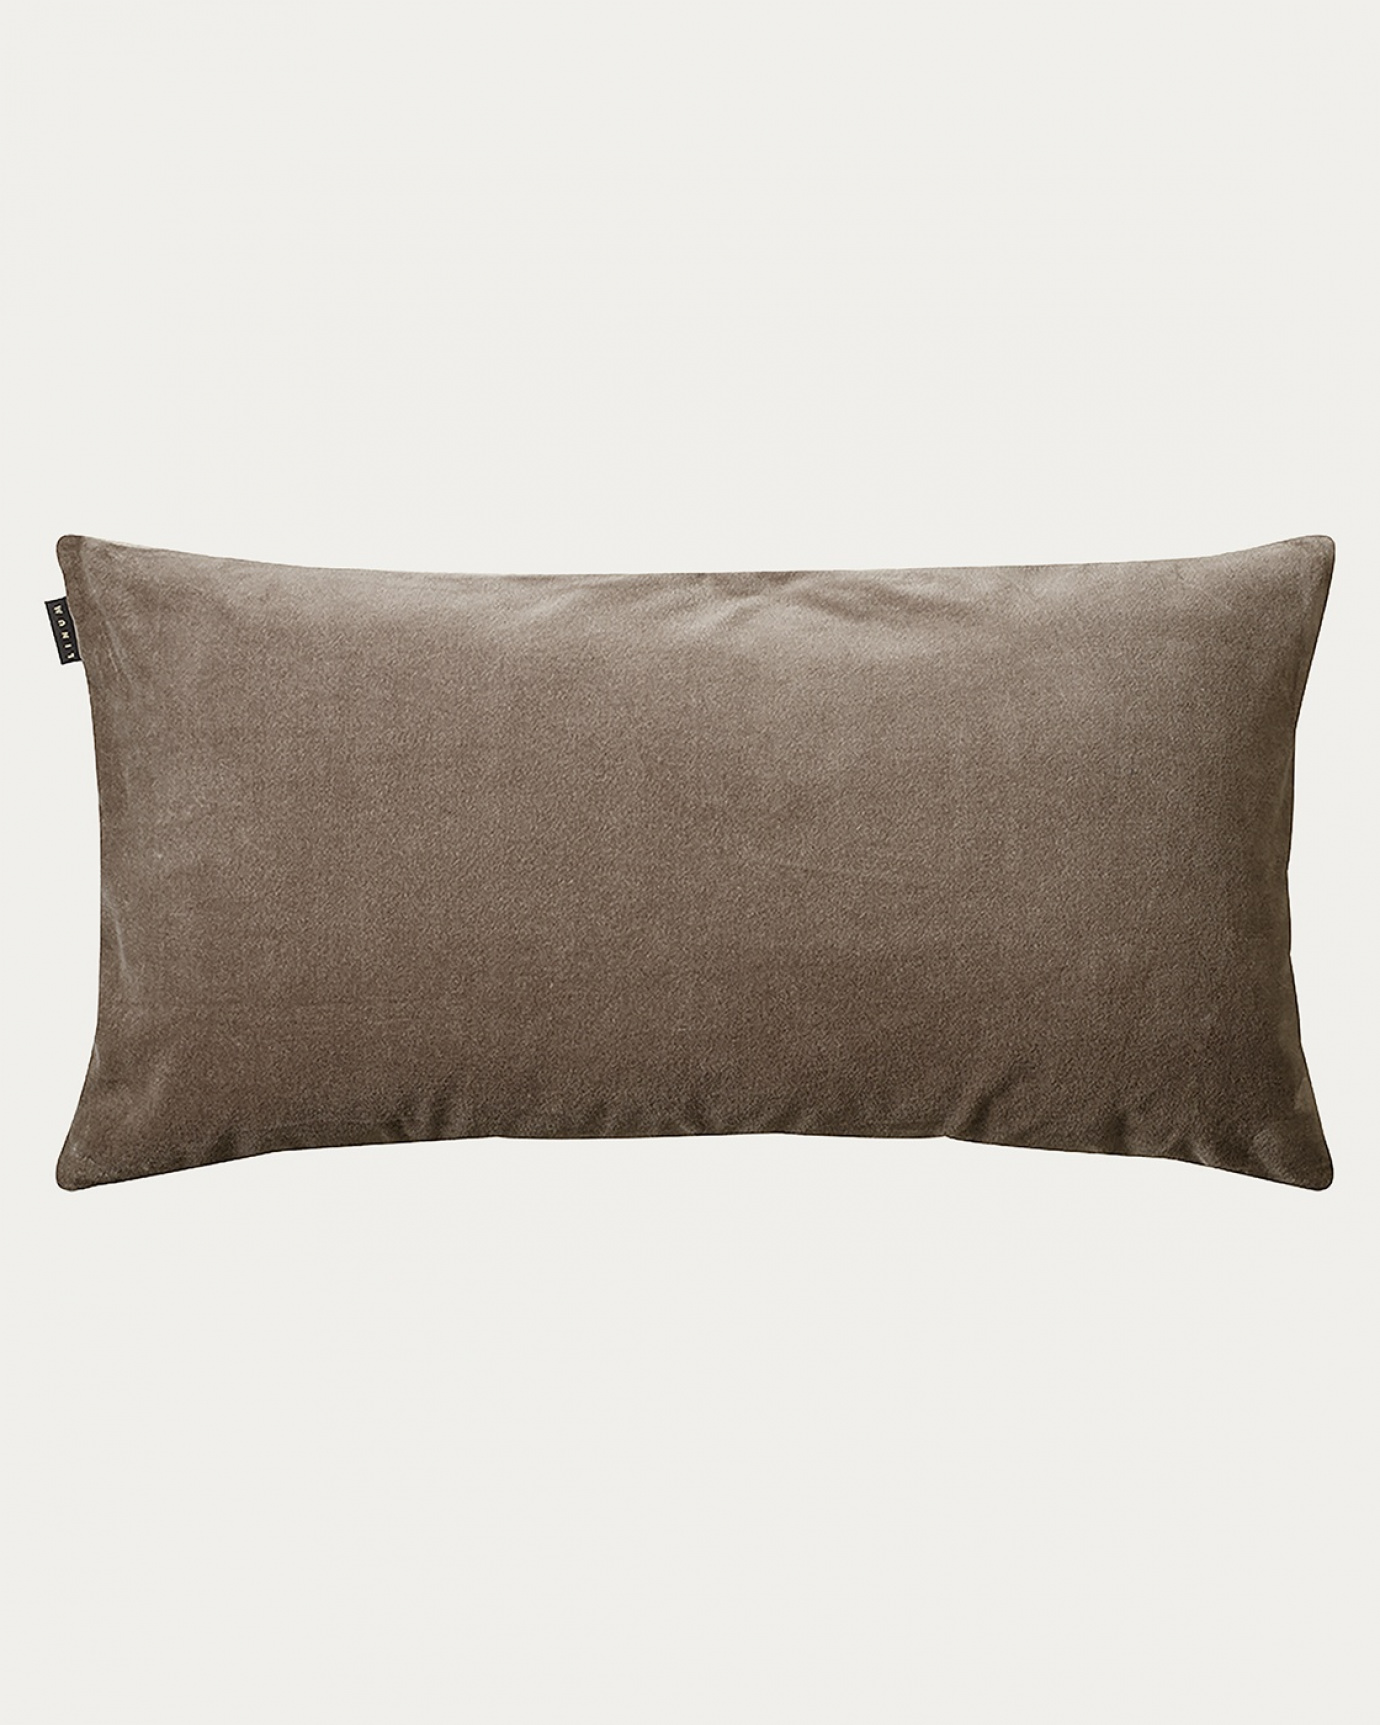 Product image mole brown PAOLO cushion cover made of soft cotton velvet and 100% linen from LINUM DESIGN. Size 50x90 cm.